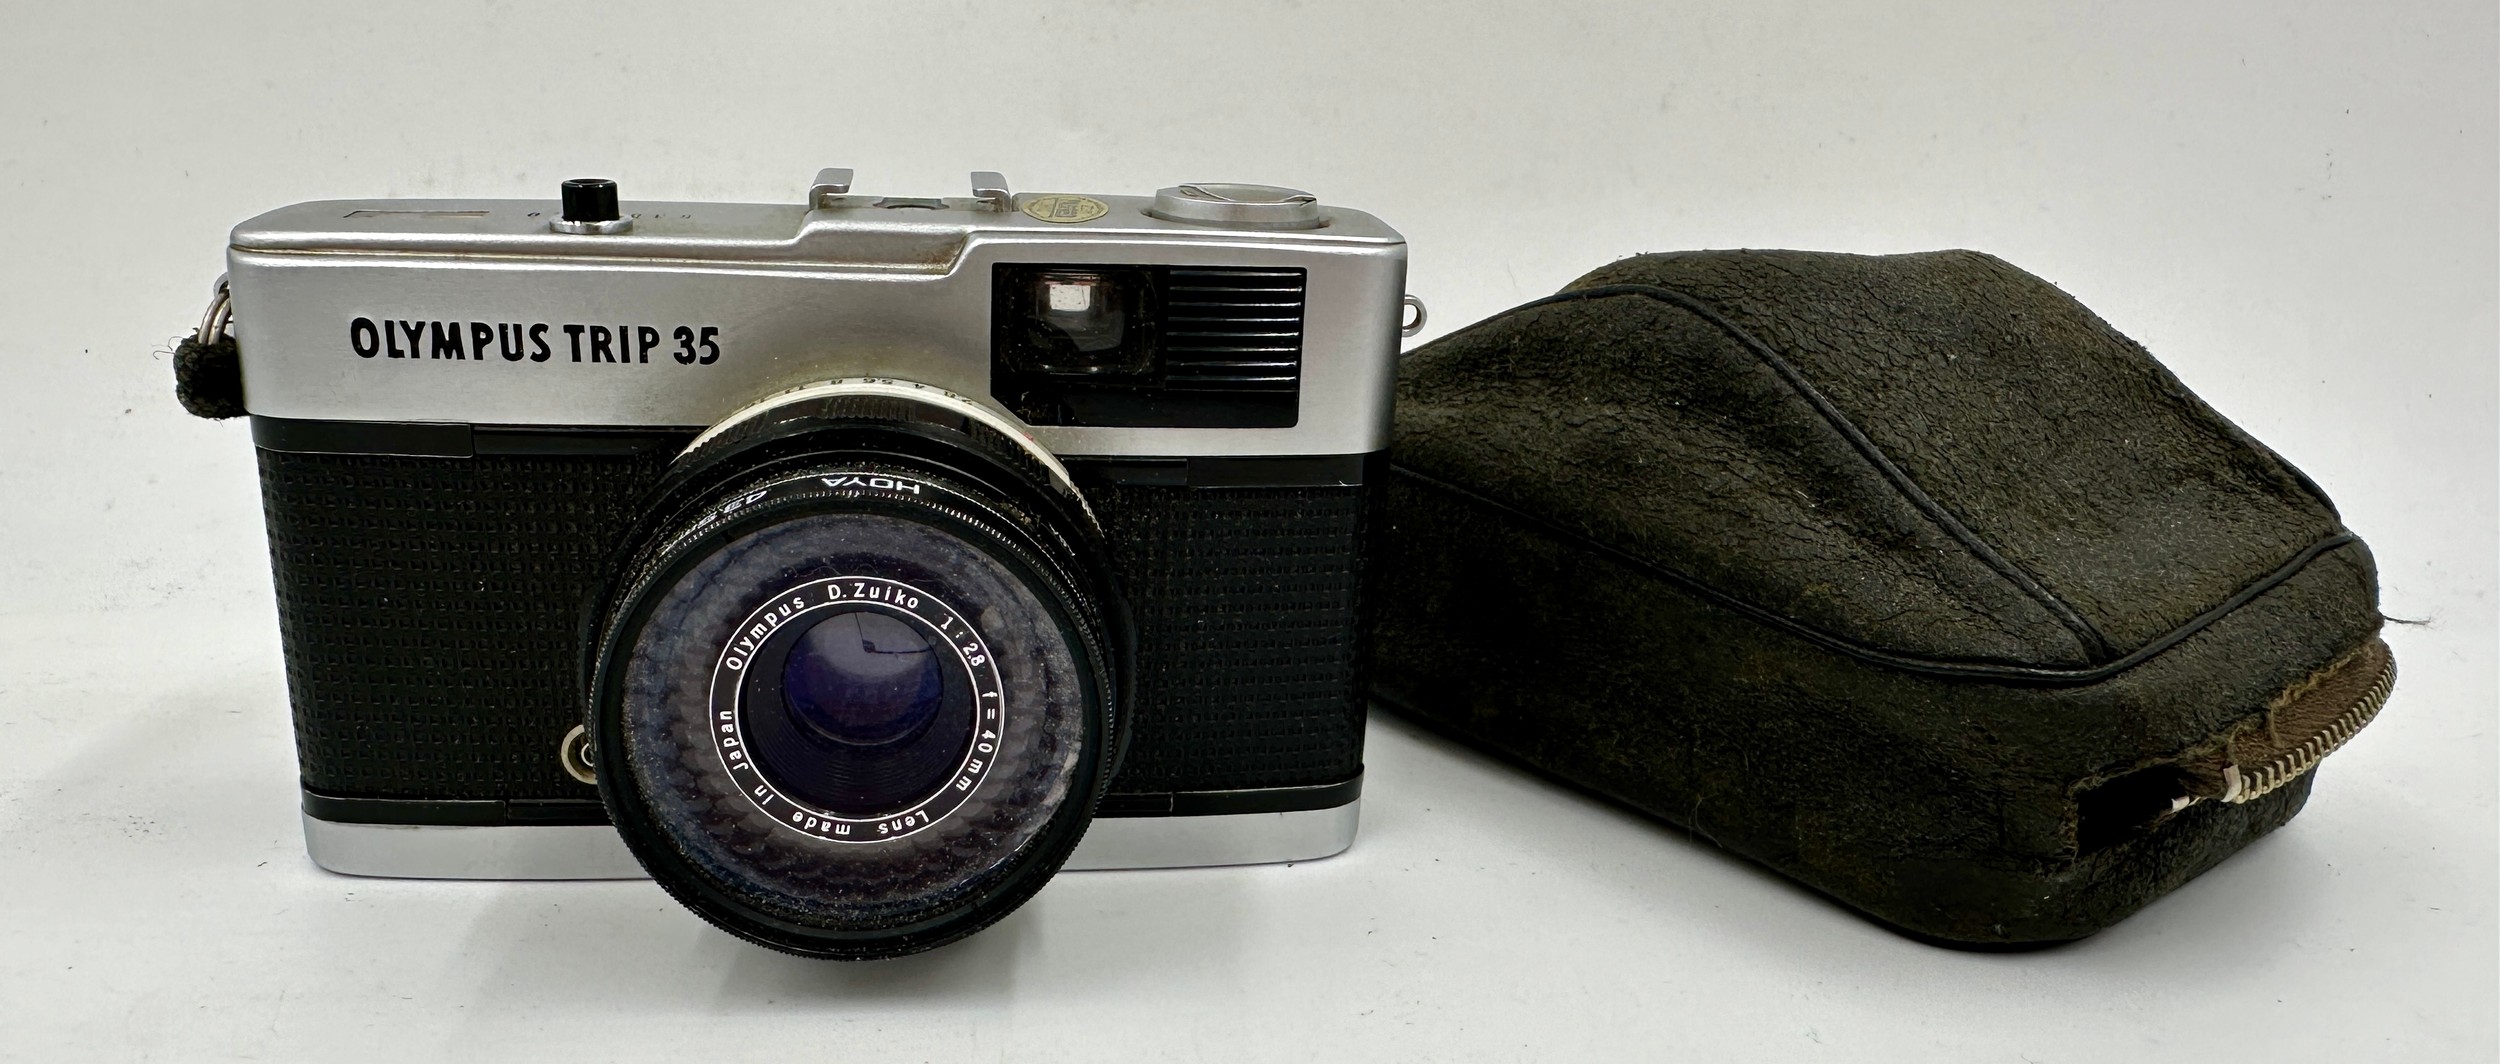 An Olympus Trip 35mm camera. - Image 2 of 6